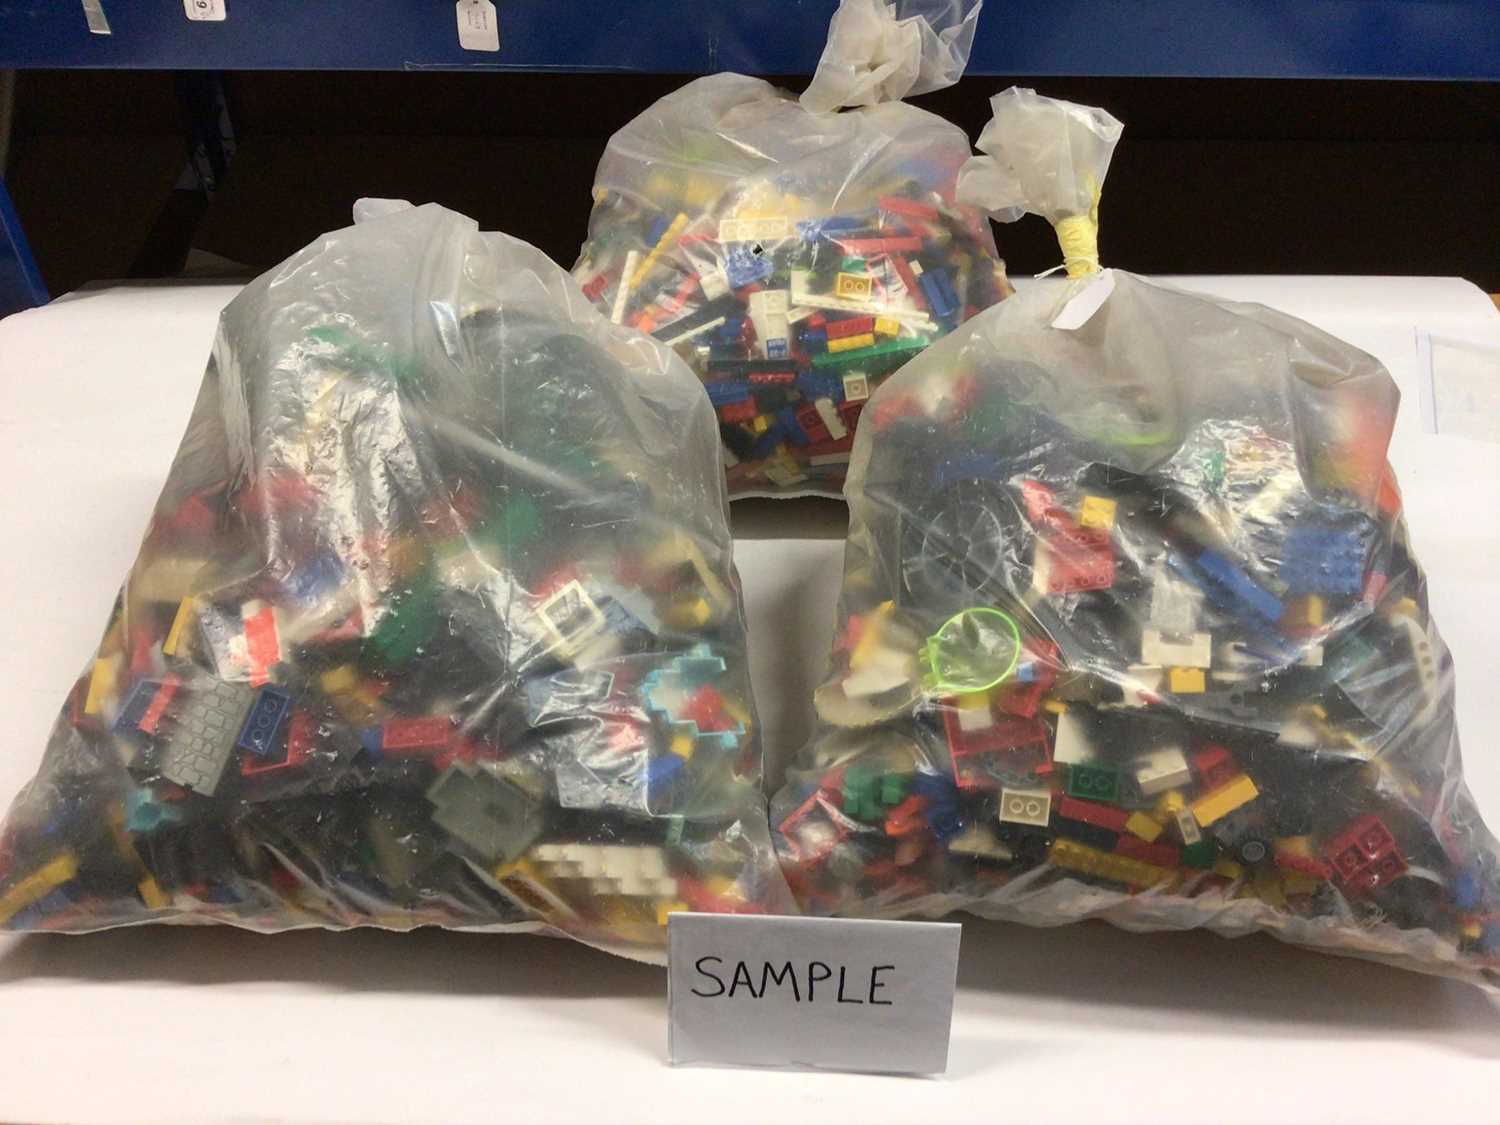 Lot 93 - Three bags of assorted mixed Lego bricks and accessories, weighing approx 15 Kg in total